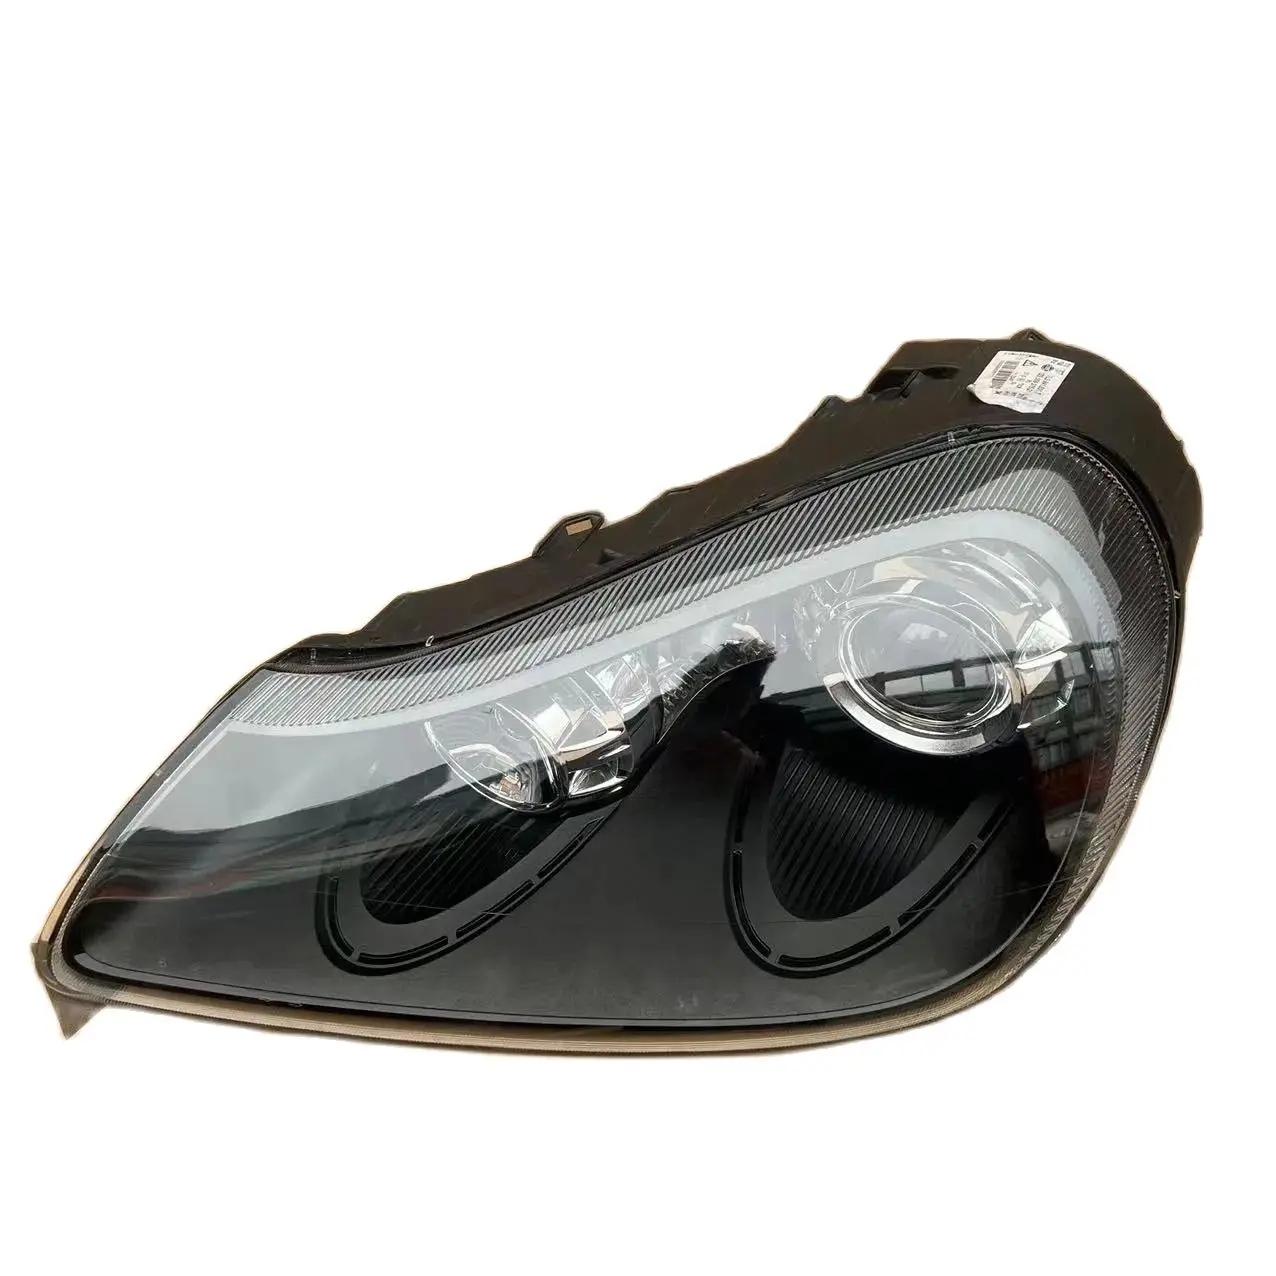 On front headlights for porsche cayenne car lights styling head lamp original 2007 2010 thumb200